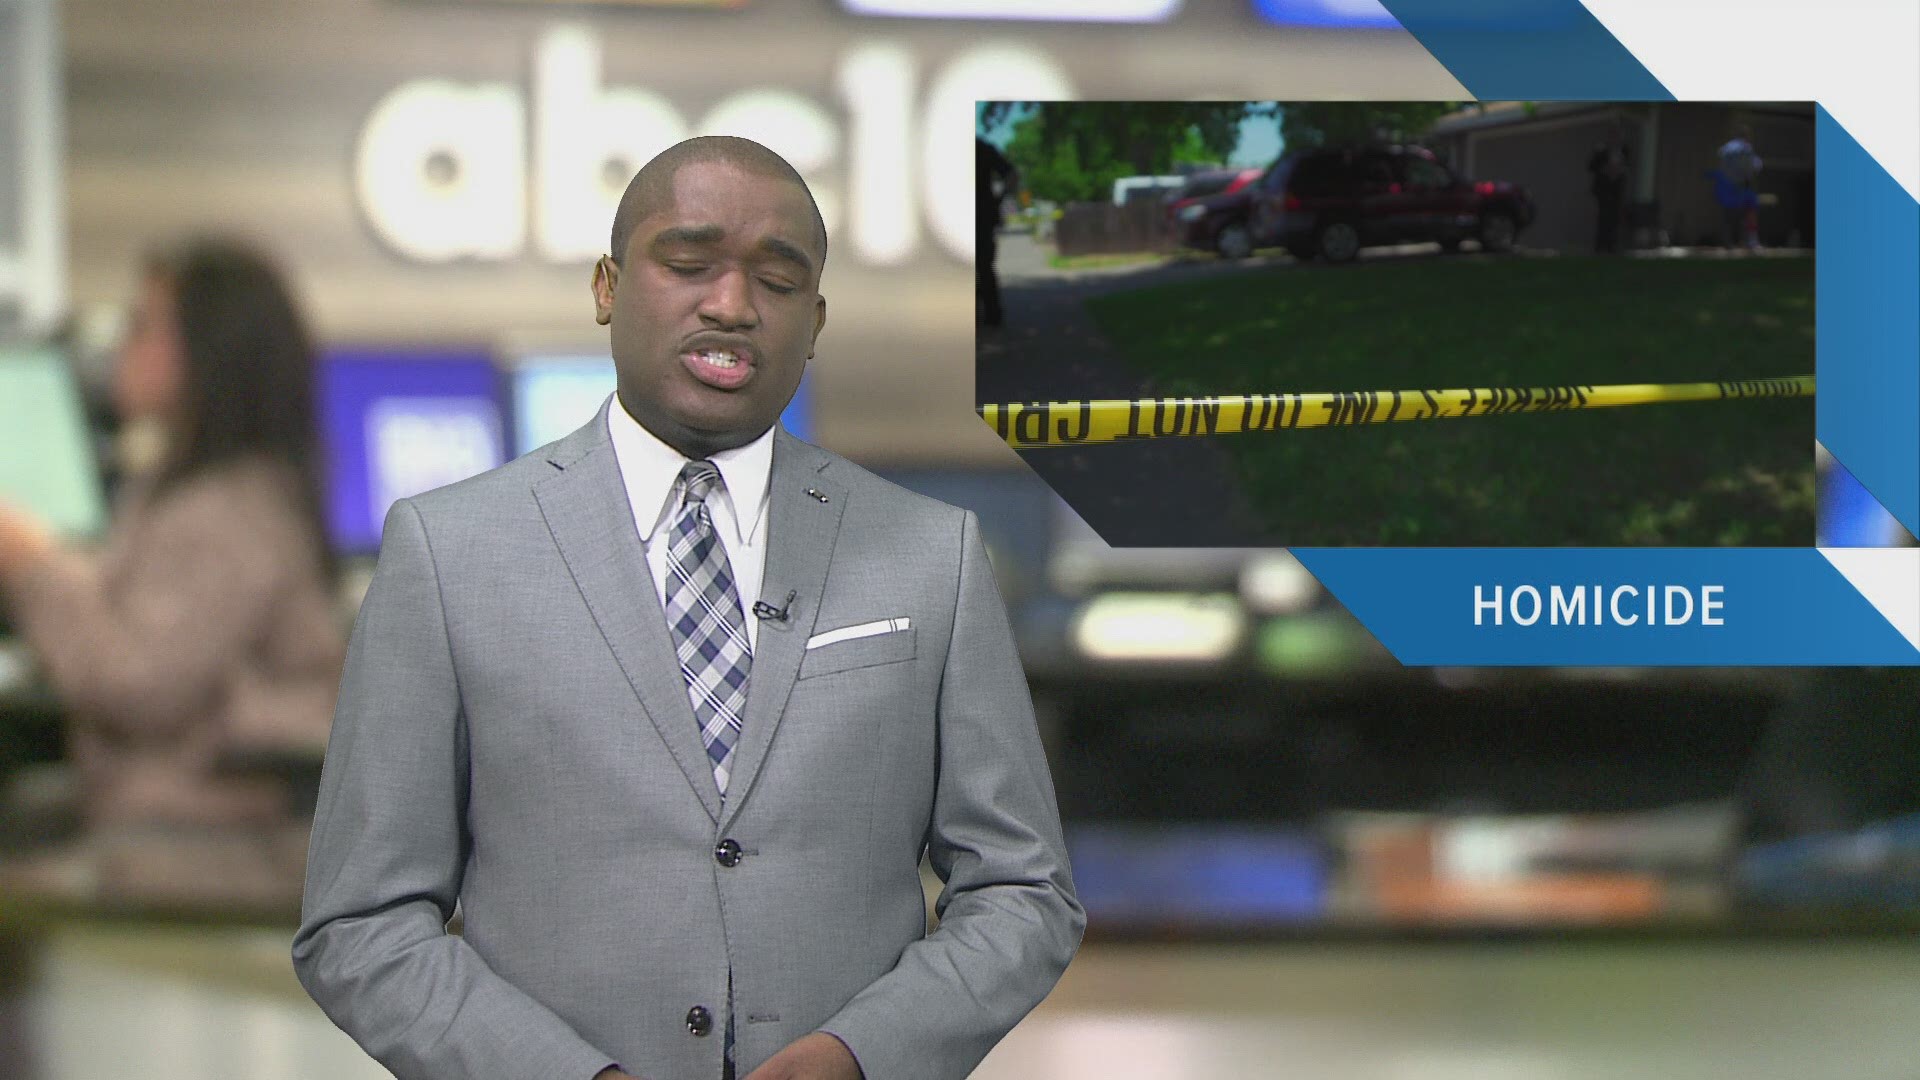 Evening Headlines: June 13, 2019 | Catch in-depth reporting on #LateNewsTonight at 11 p.m. | The latest Sacramento news is always at www.abc10.com